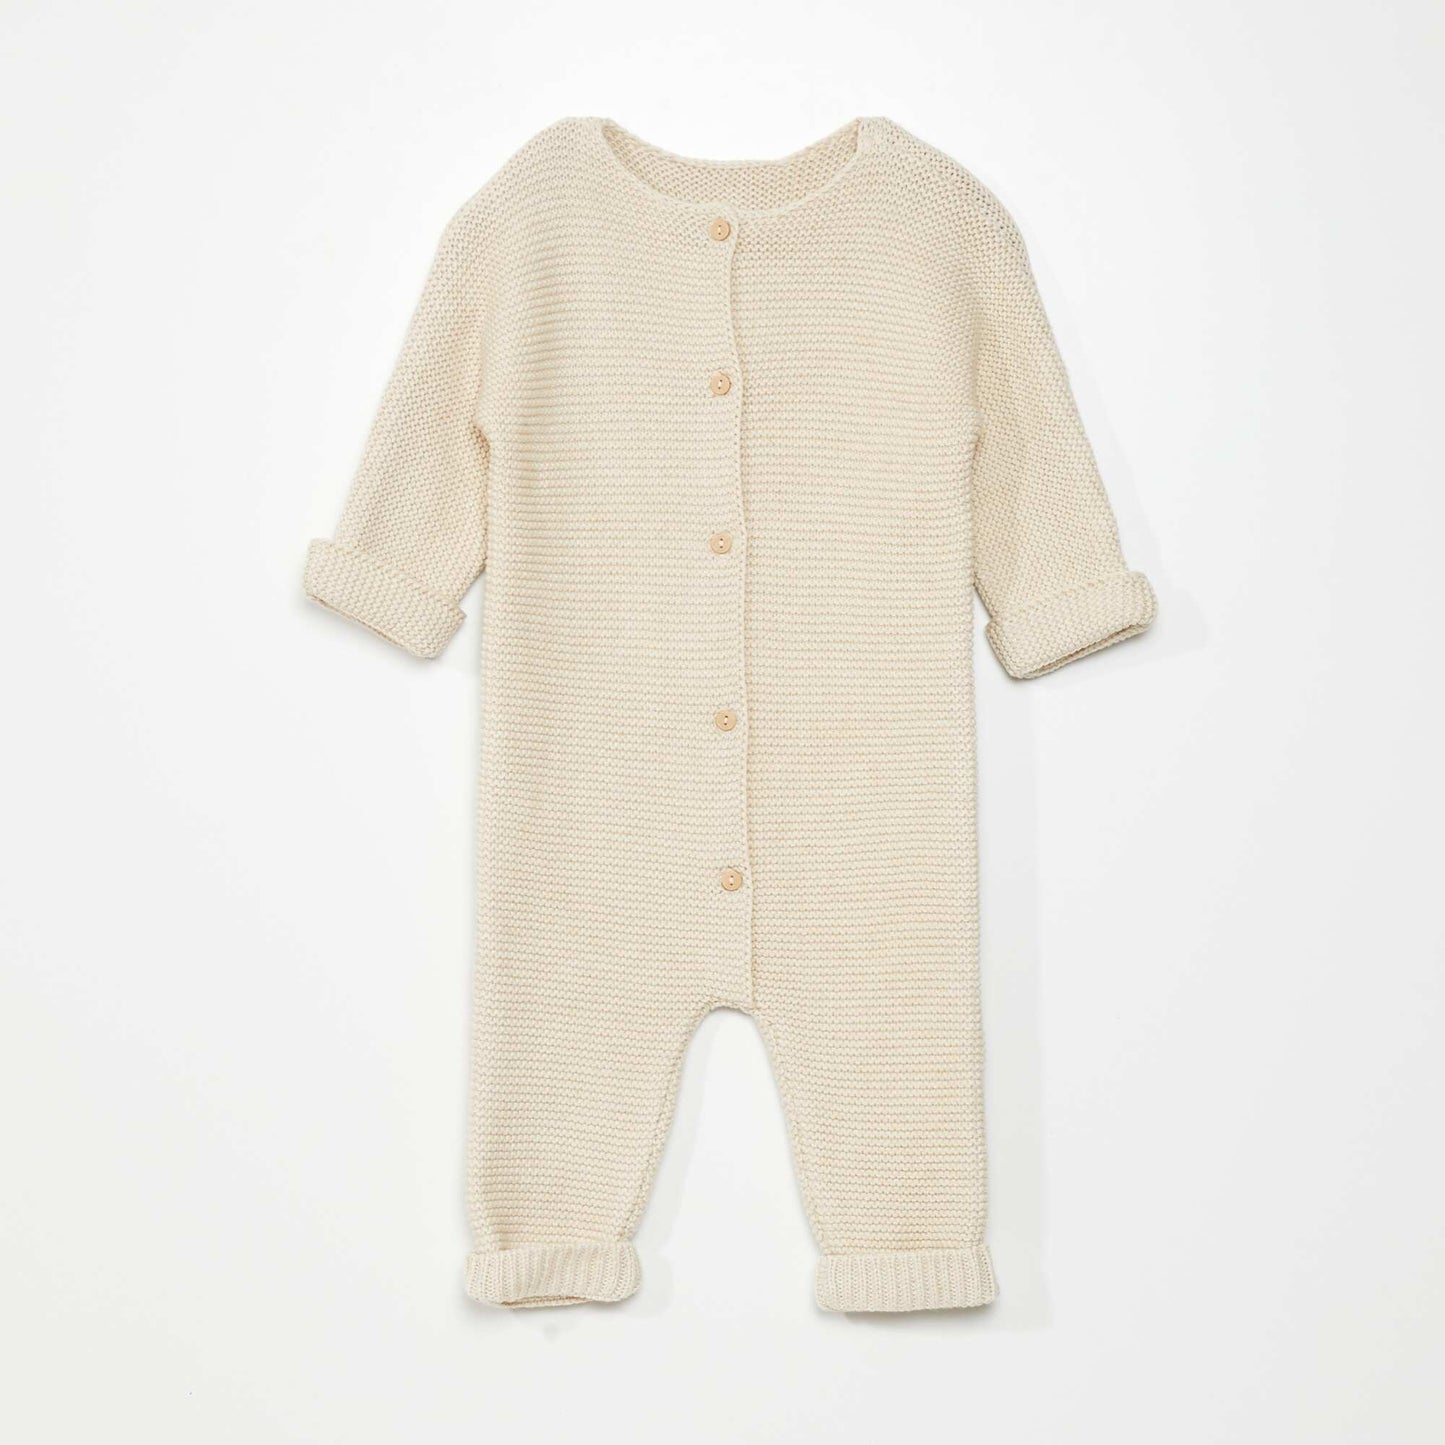 Long knit all-in-one - Super practical BEIGE BEER